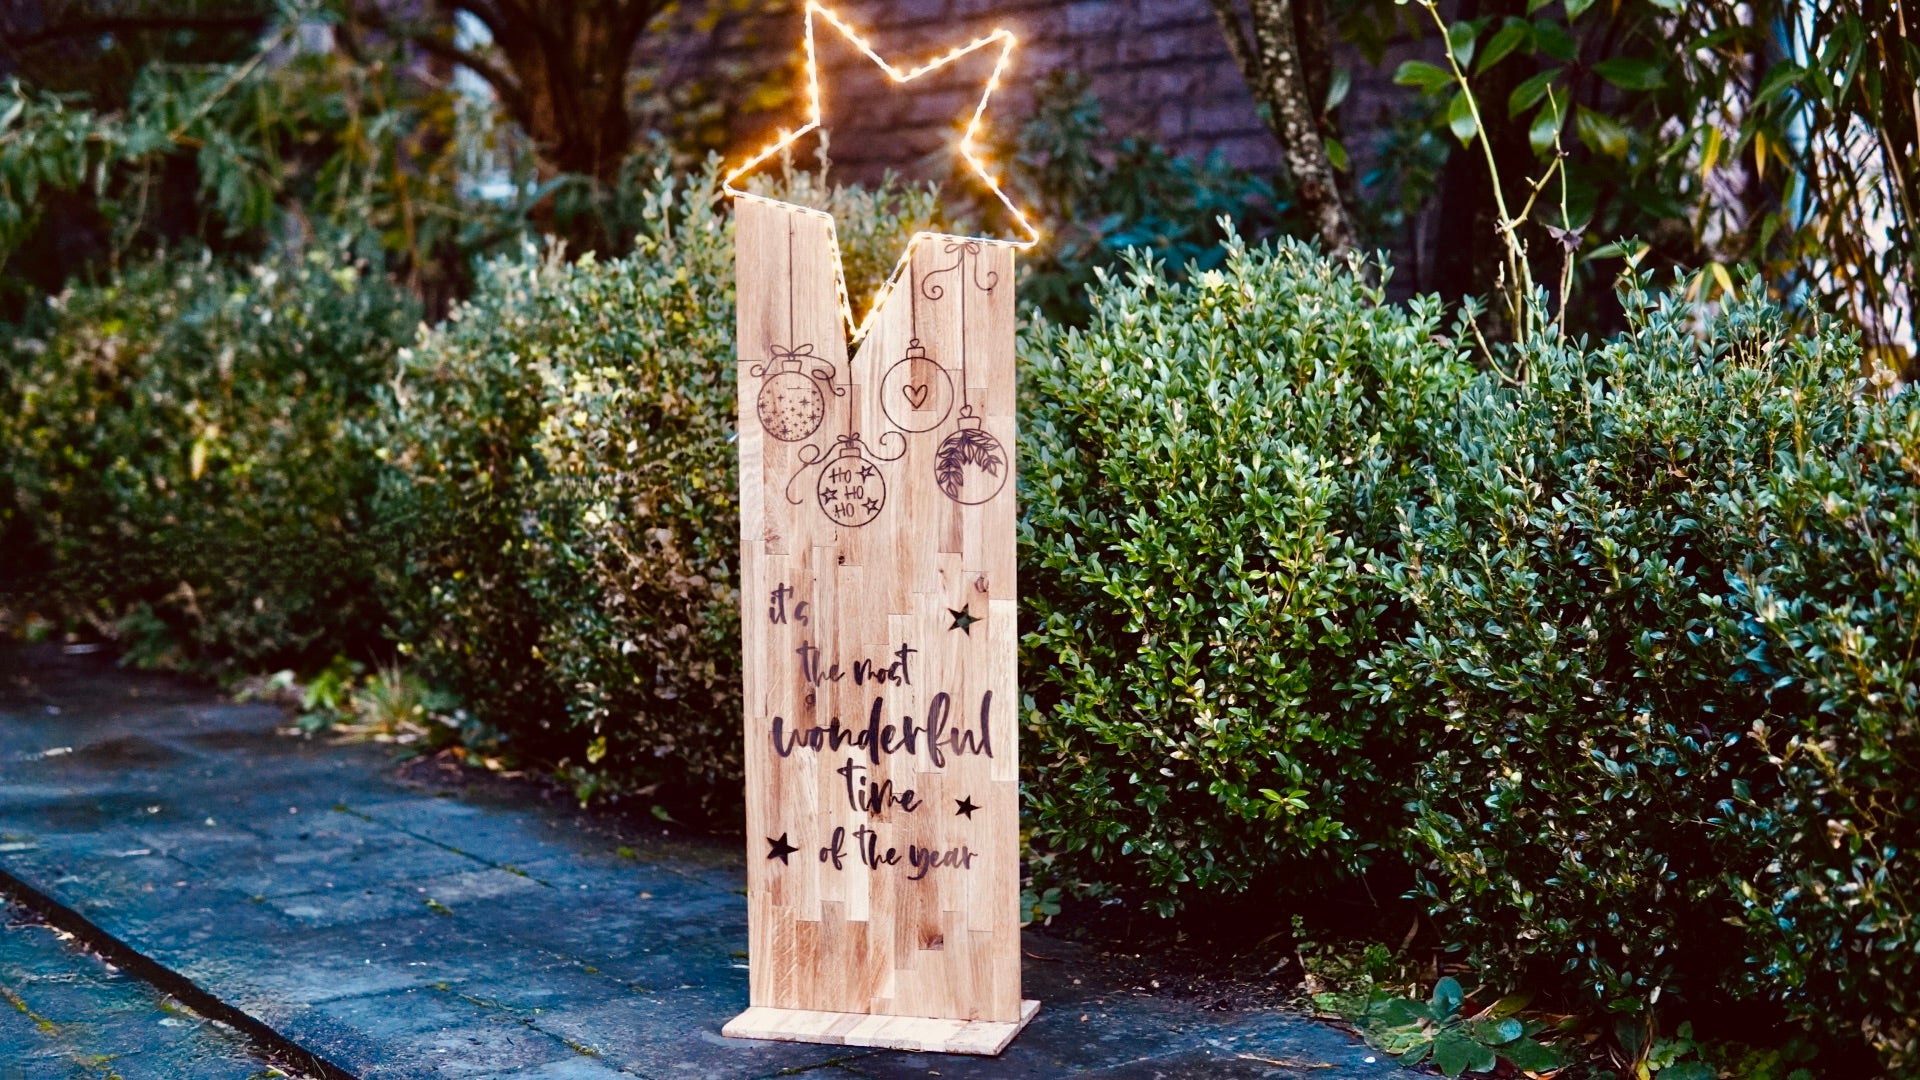 Make glowing Christmas decorations for the garden ➡️ Tutorial